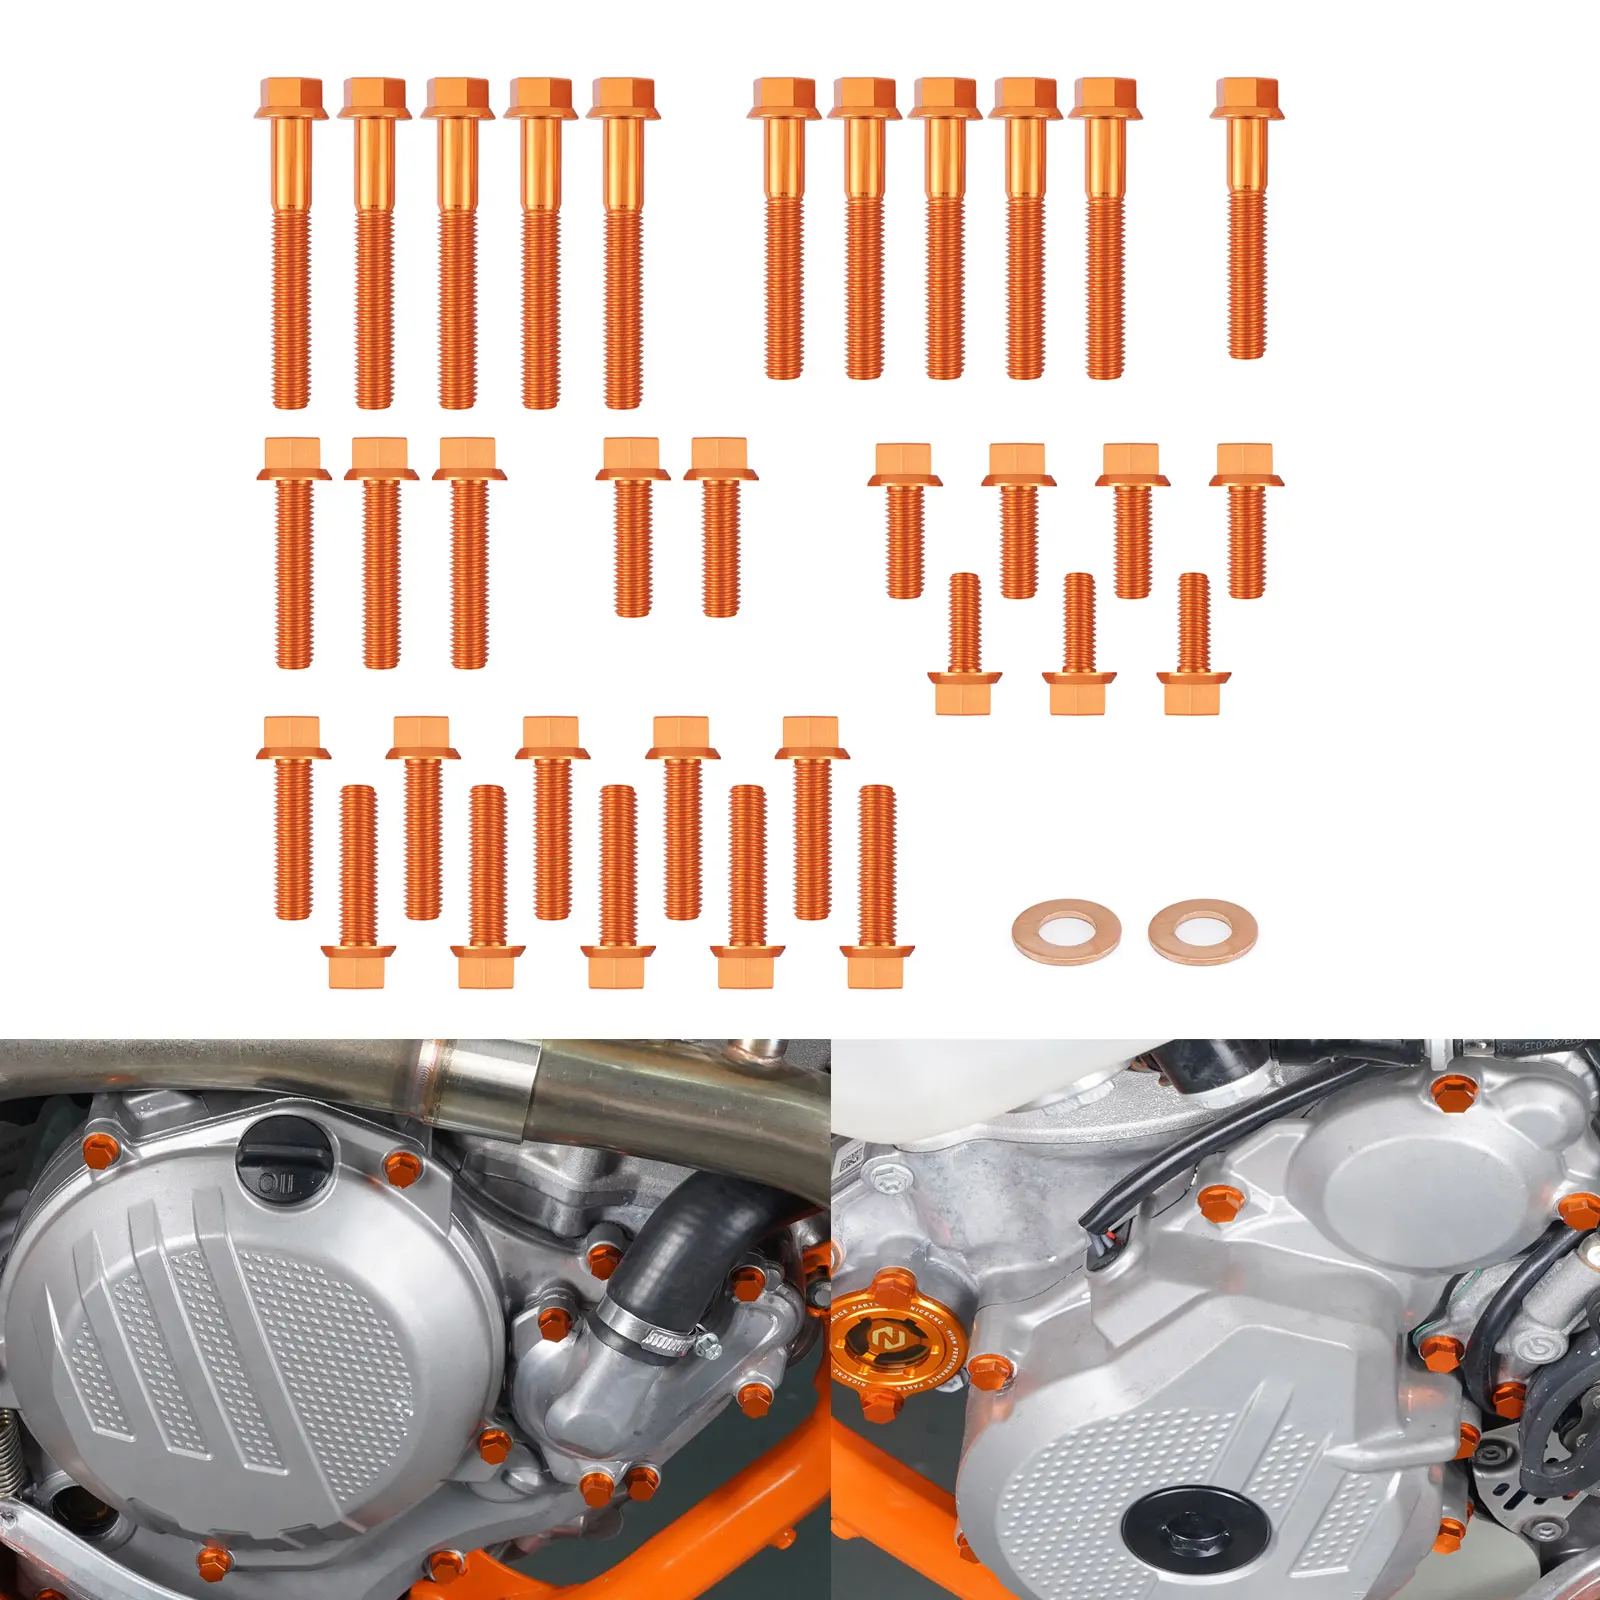 

35PCS M5 M6 Aluminum Engine Bolts Kit For KTM 250 350 EXCF EXC-F 2017 2018 2019 2020 2021 2022 Clutch Cover Water Pump Cover